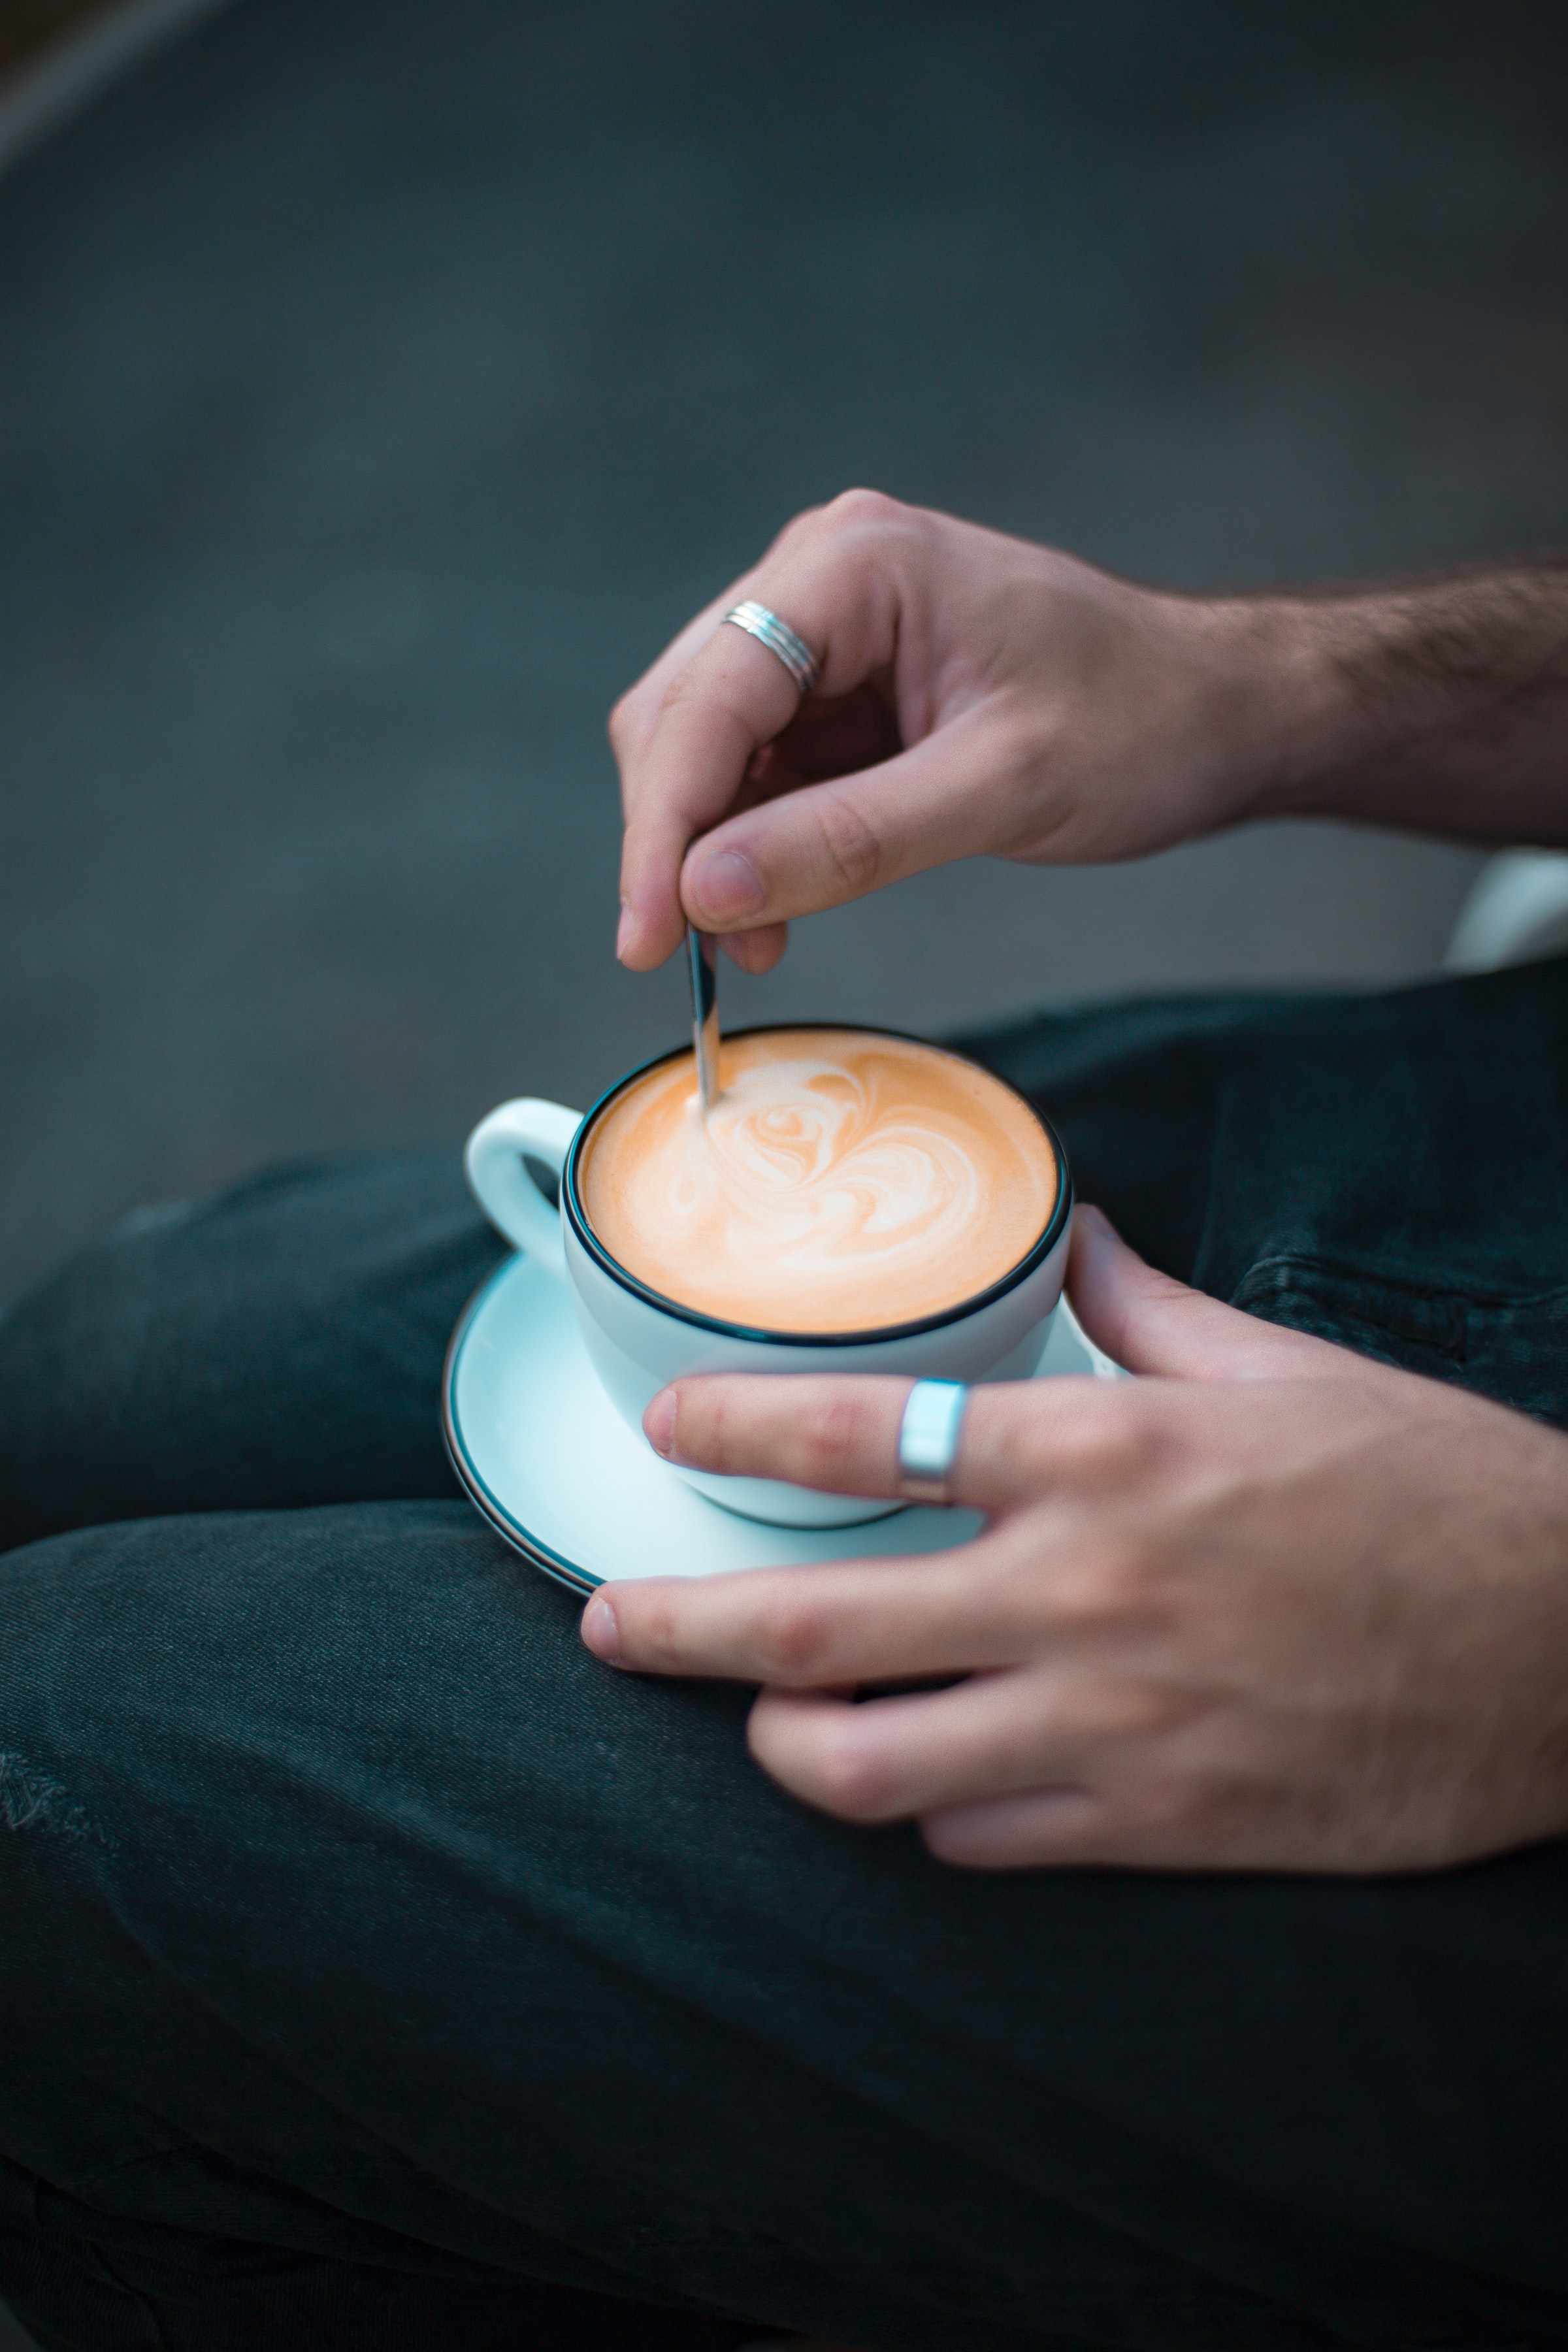 miscellanea, miscellaneous, cup, hands, ring, cappuccino, drink, beverage